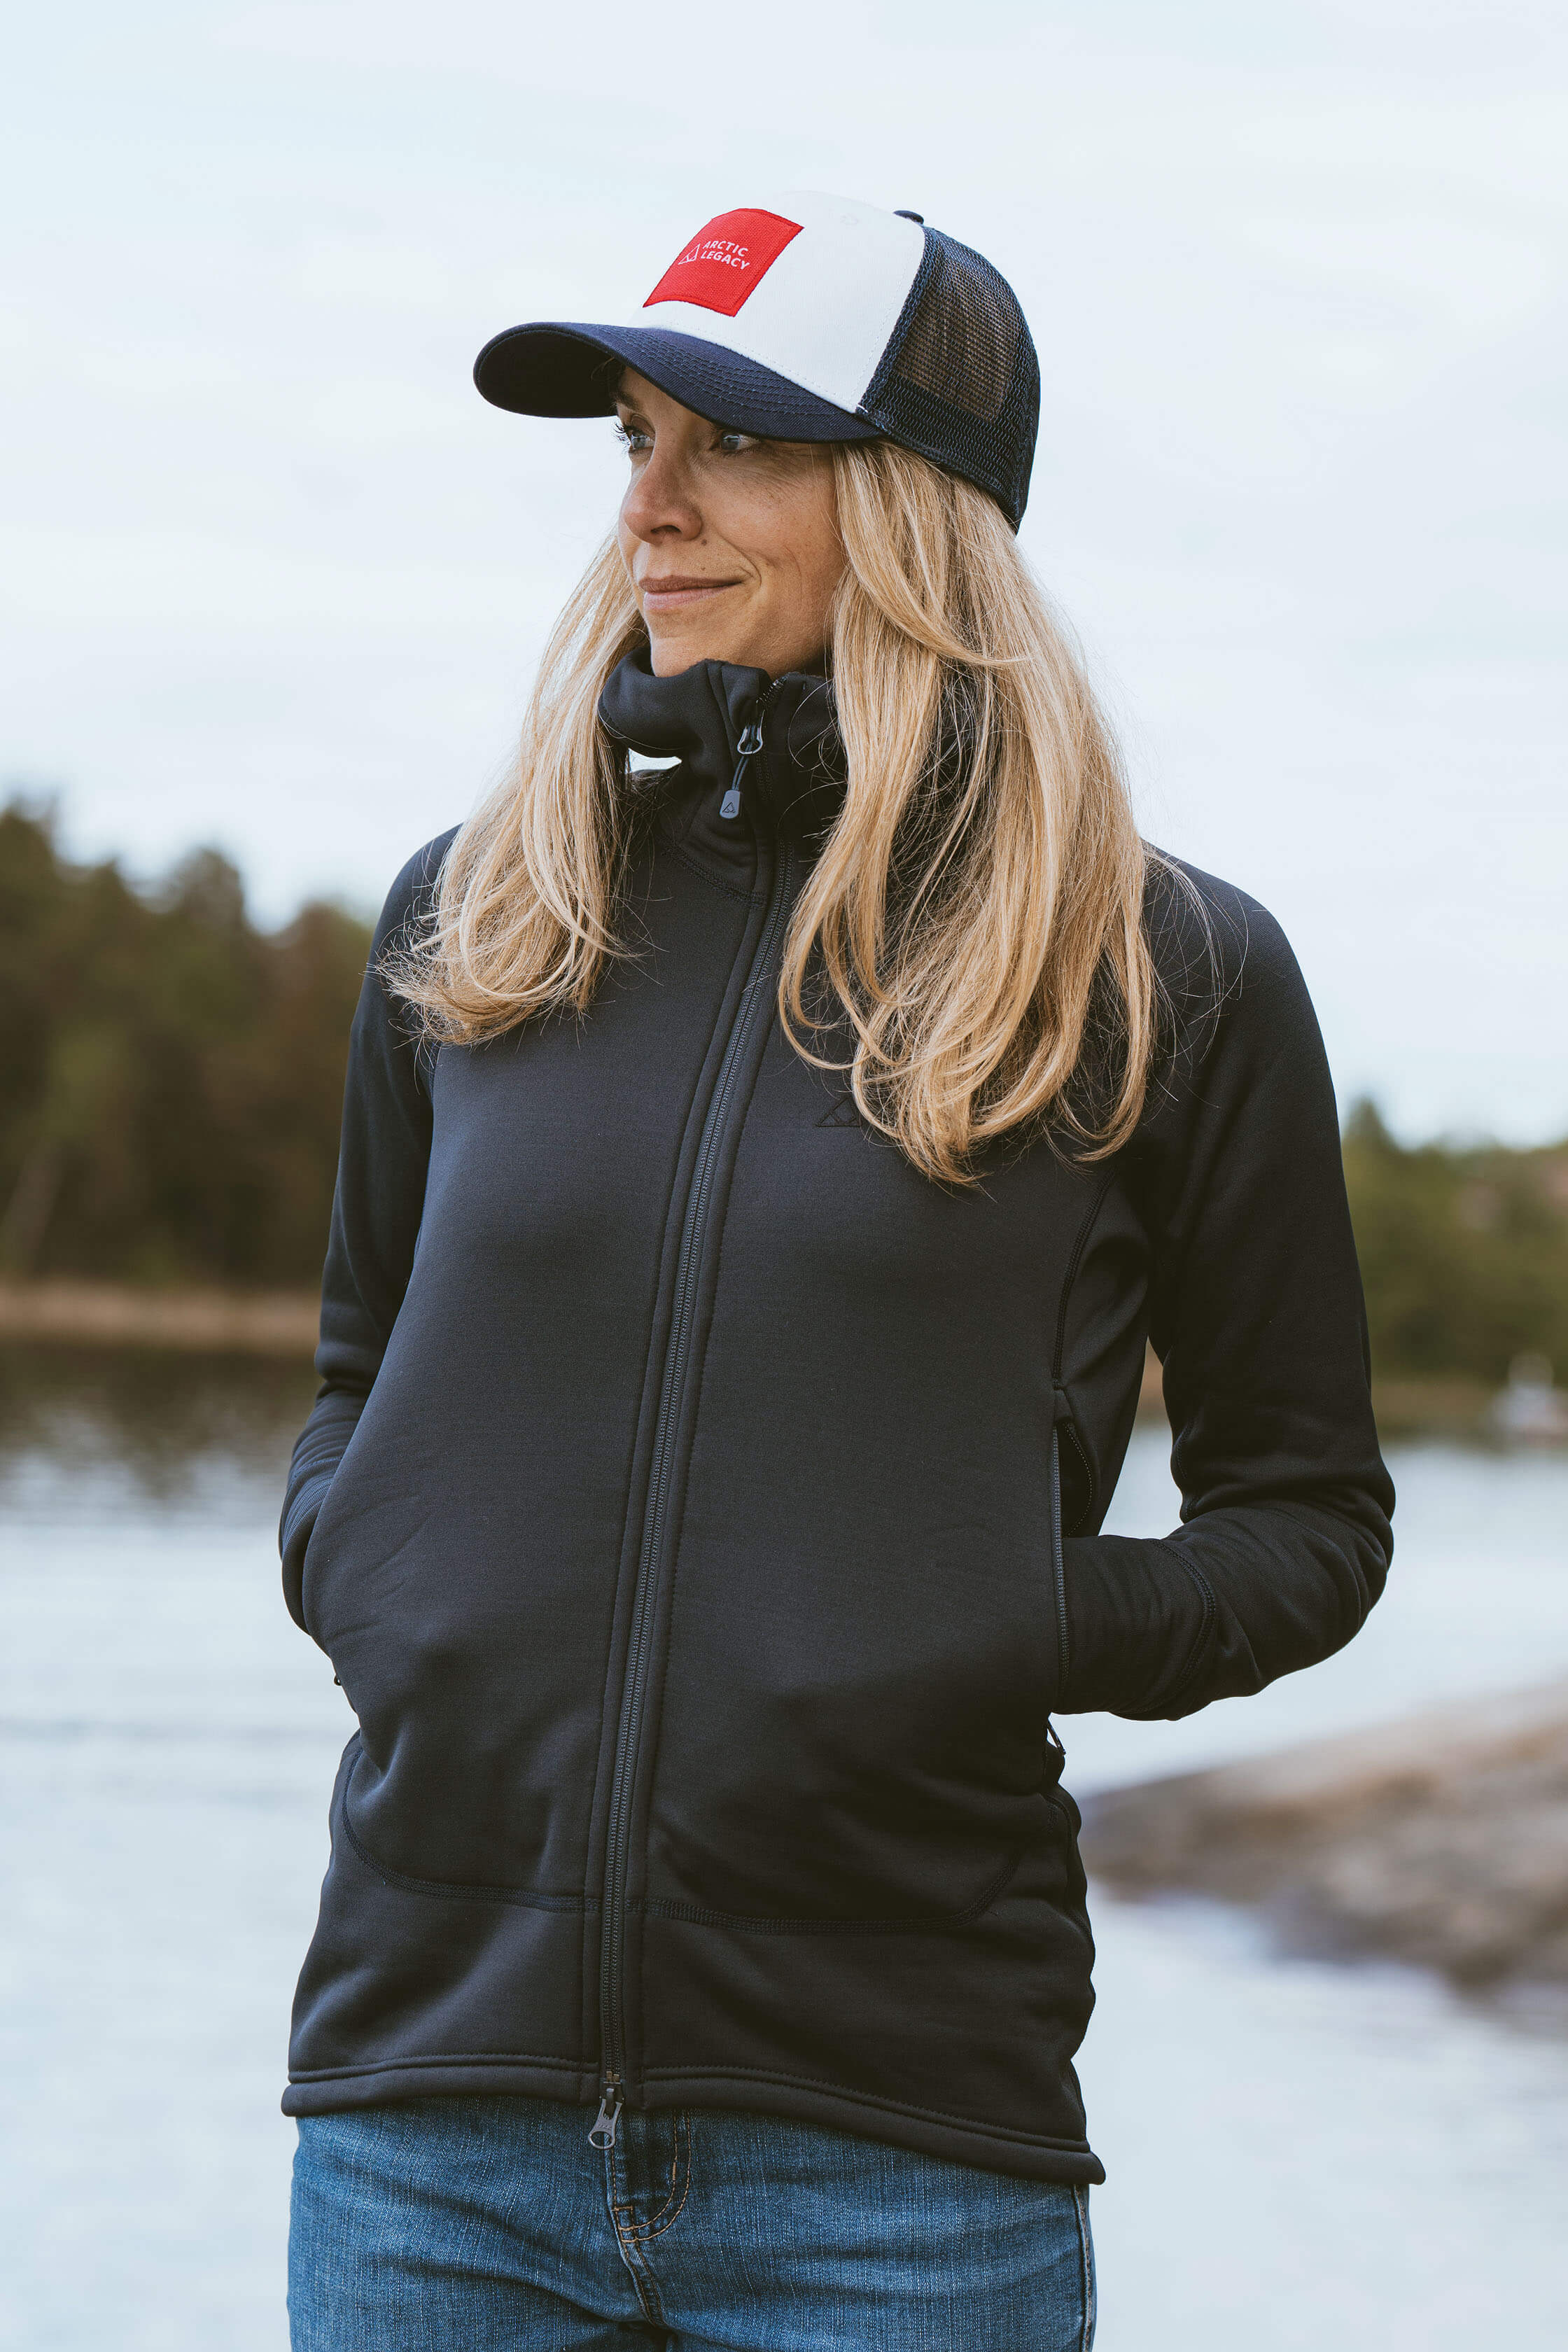 Fleece Jackets for Women - Proudly Made in Europe - Arctic Legacy